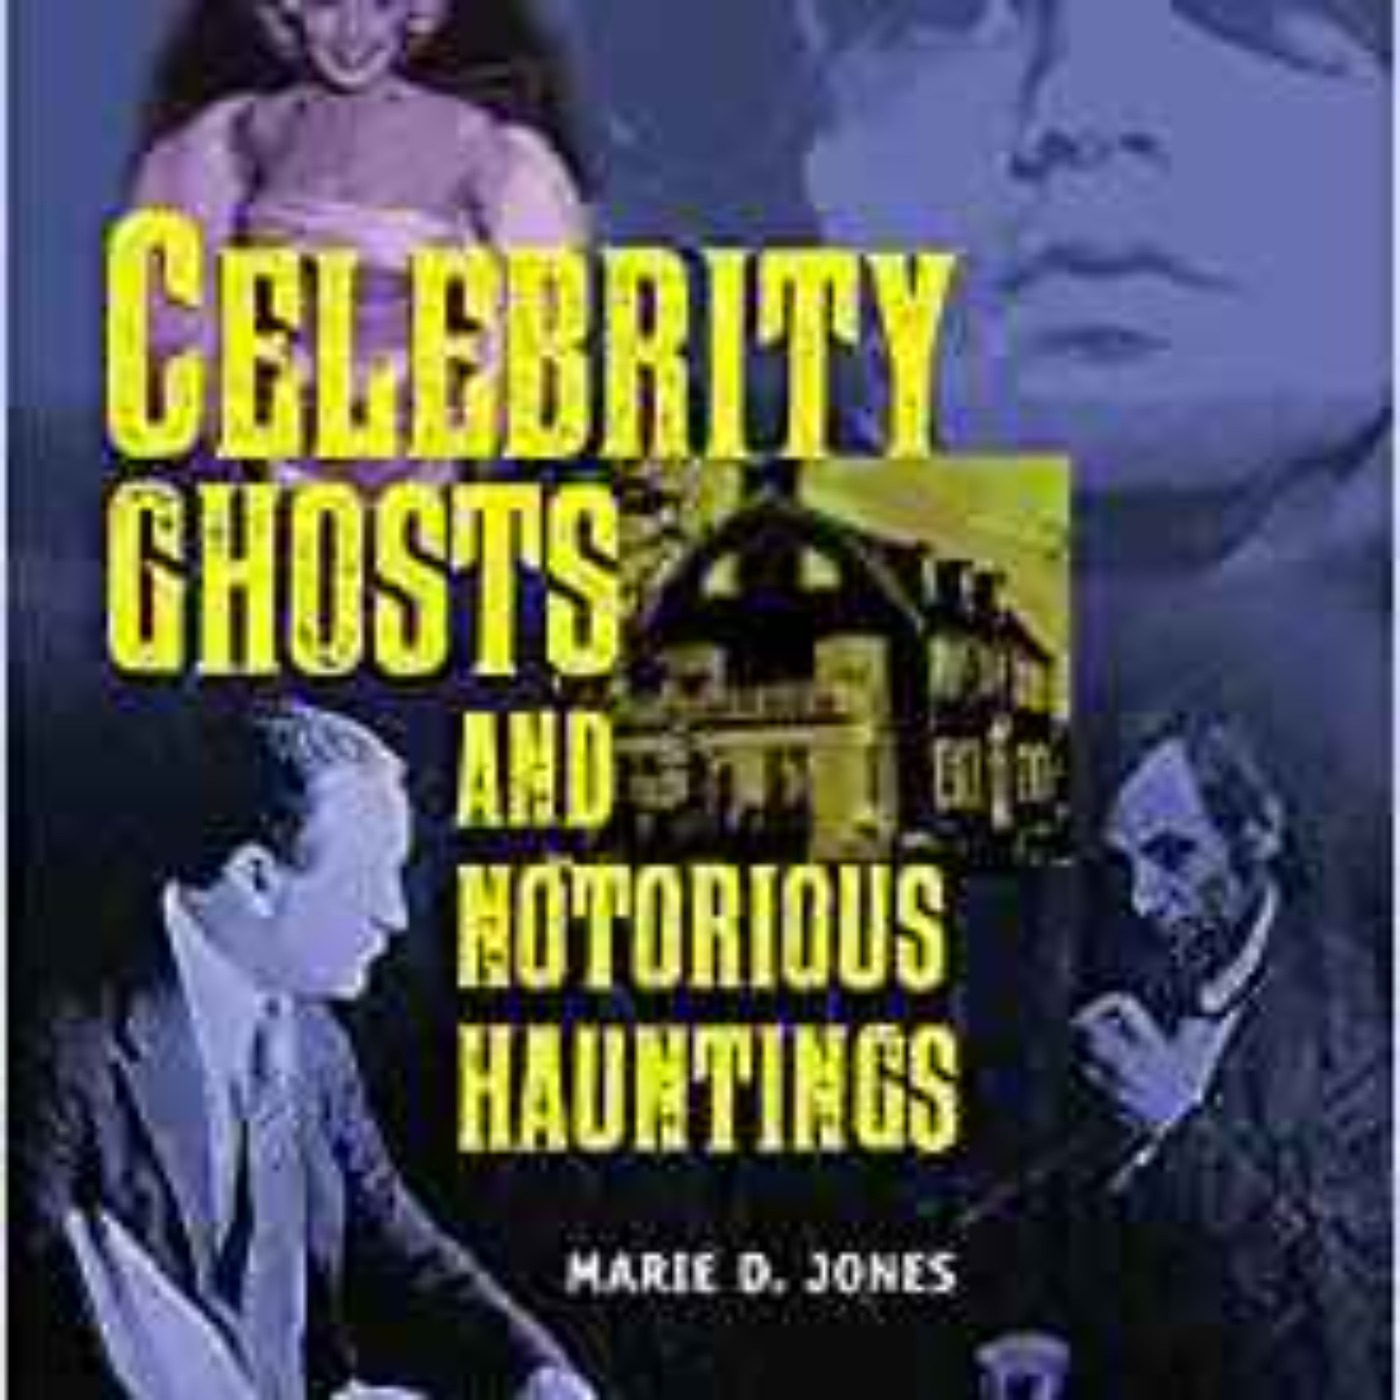 Marie D. Jones - Celebrity Ghosts and Notorious Hauntings (The Real Unexplained!